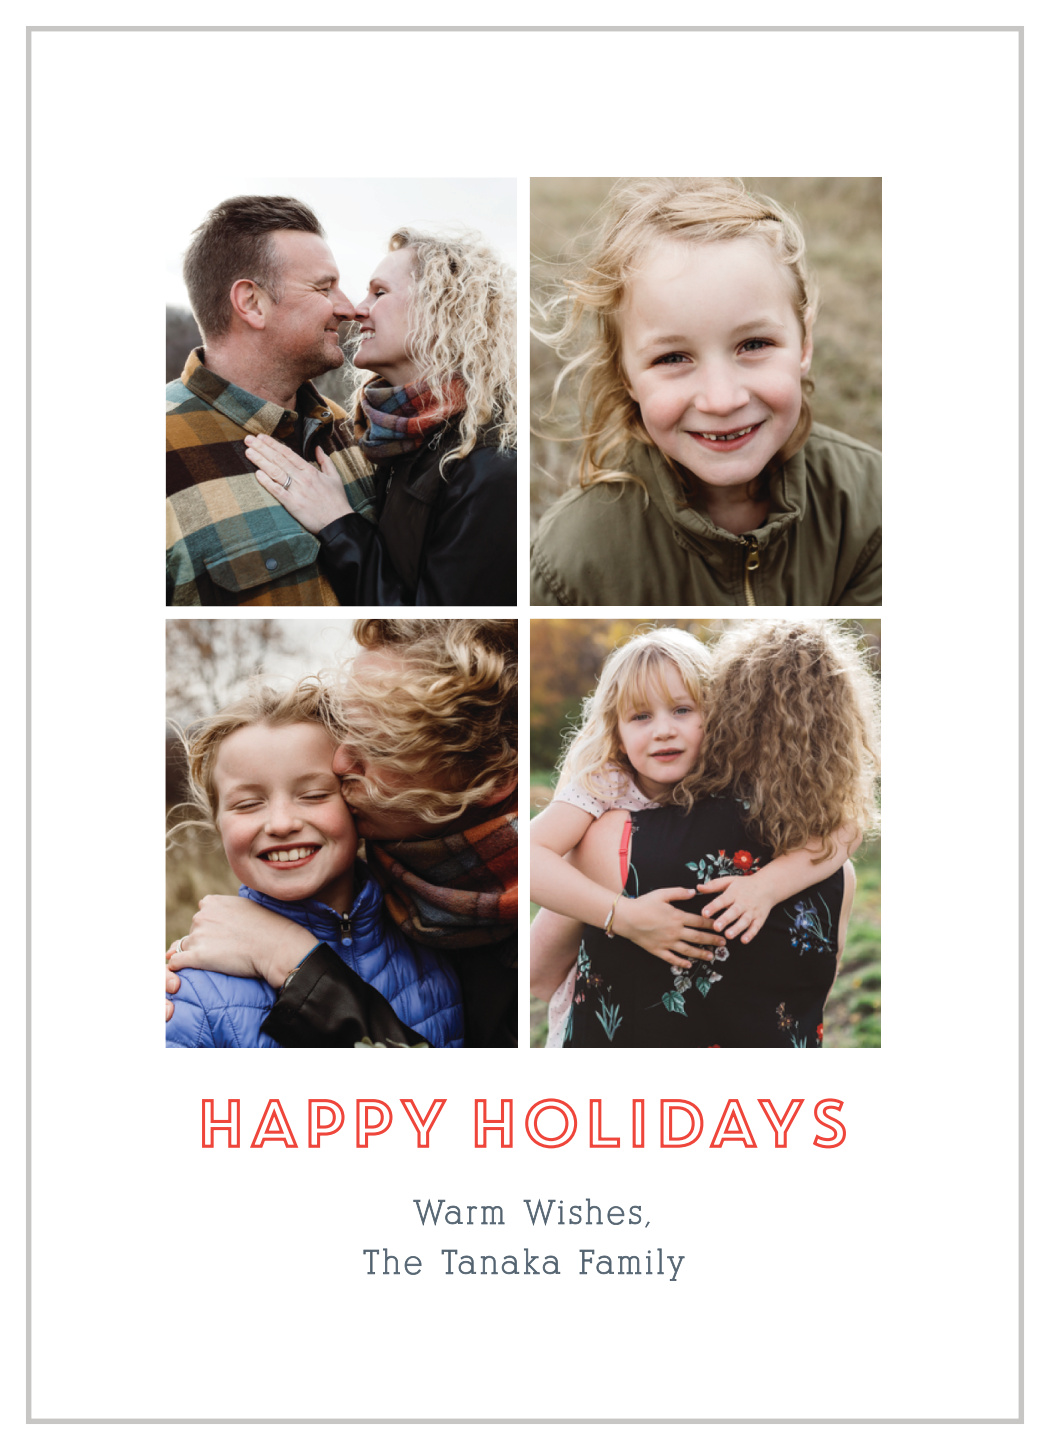 Our Story Photo Holiday Cards